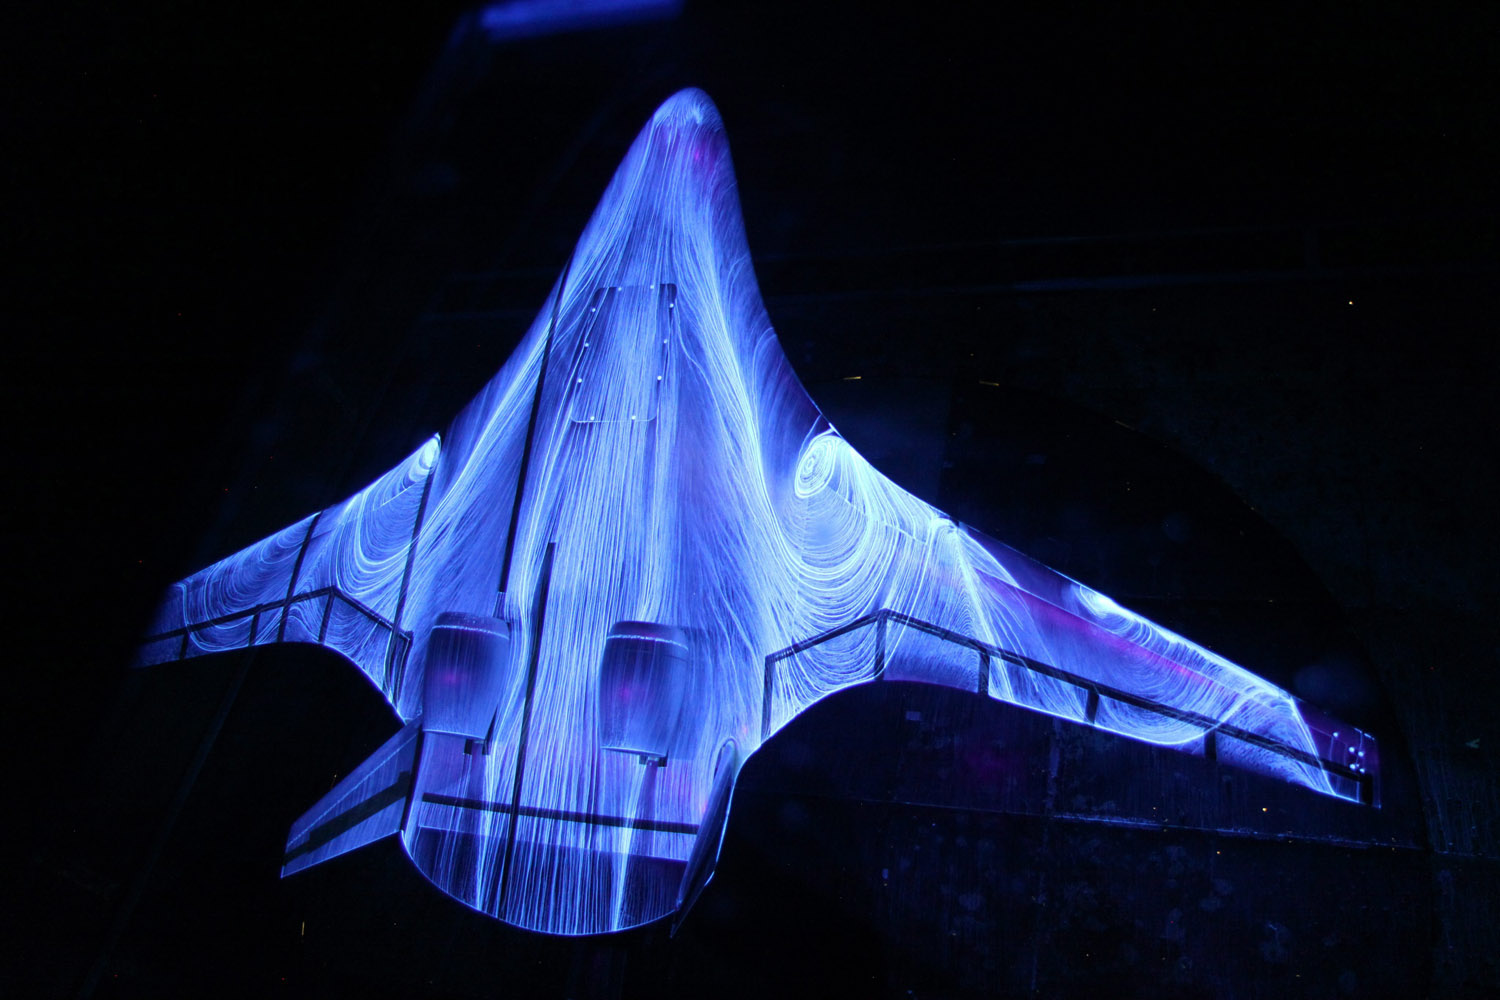 Sept. 29, 2013. A fluorescent oil is sprayed on a 5.8 percent scale model of a futuristic hybrid wing body during tests in the 14 by 22 foot Subsonic Wind Tunnel in Langley Research Center in Hampton, Va.